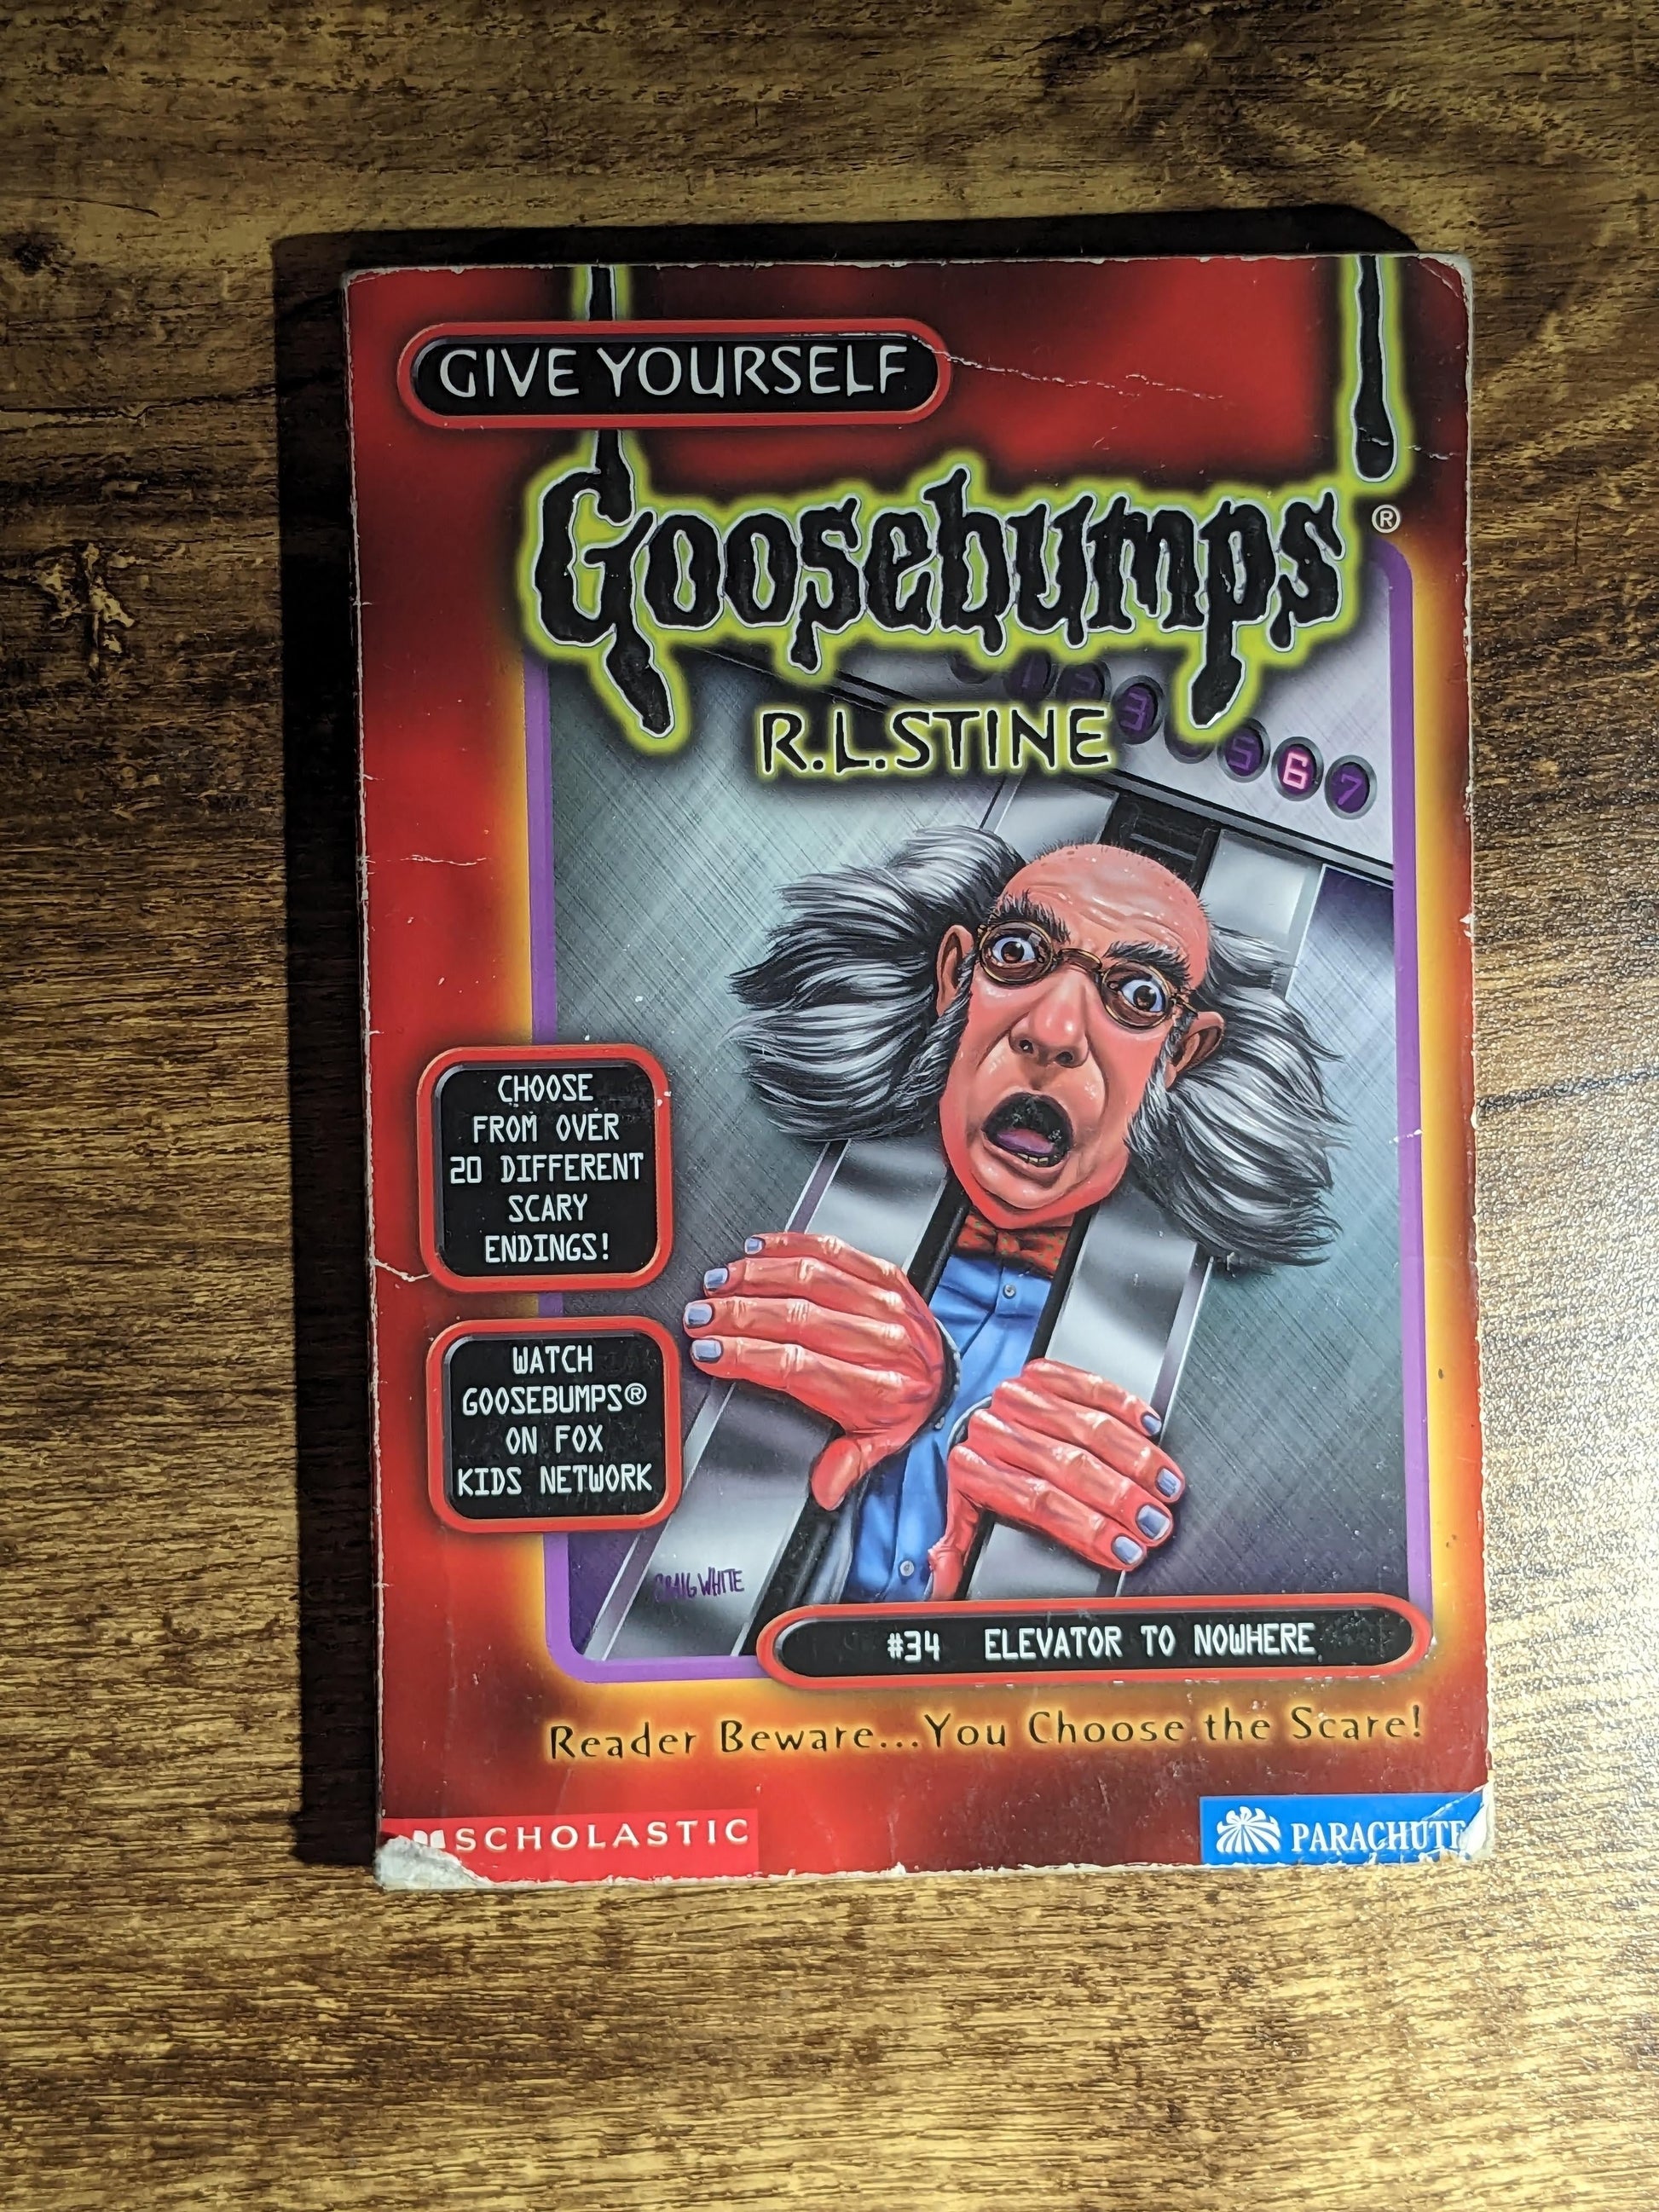 ELEVATOR TO NOWHERE (Give Yourself Goosebumps #34) by R.L. Stine - Asylum Books